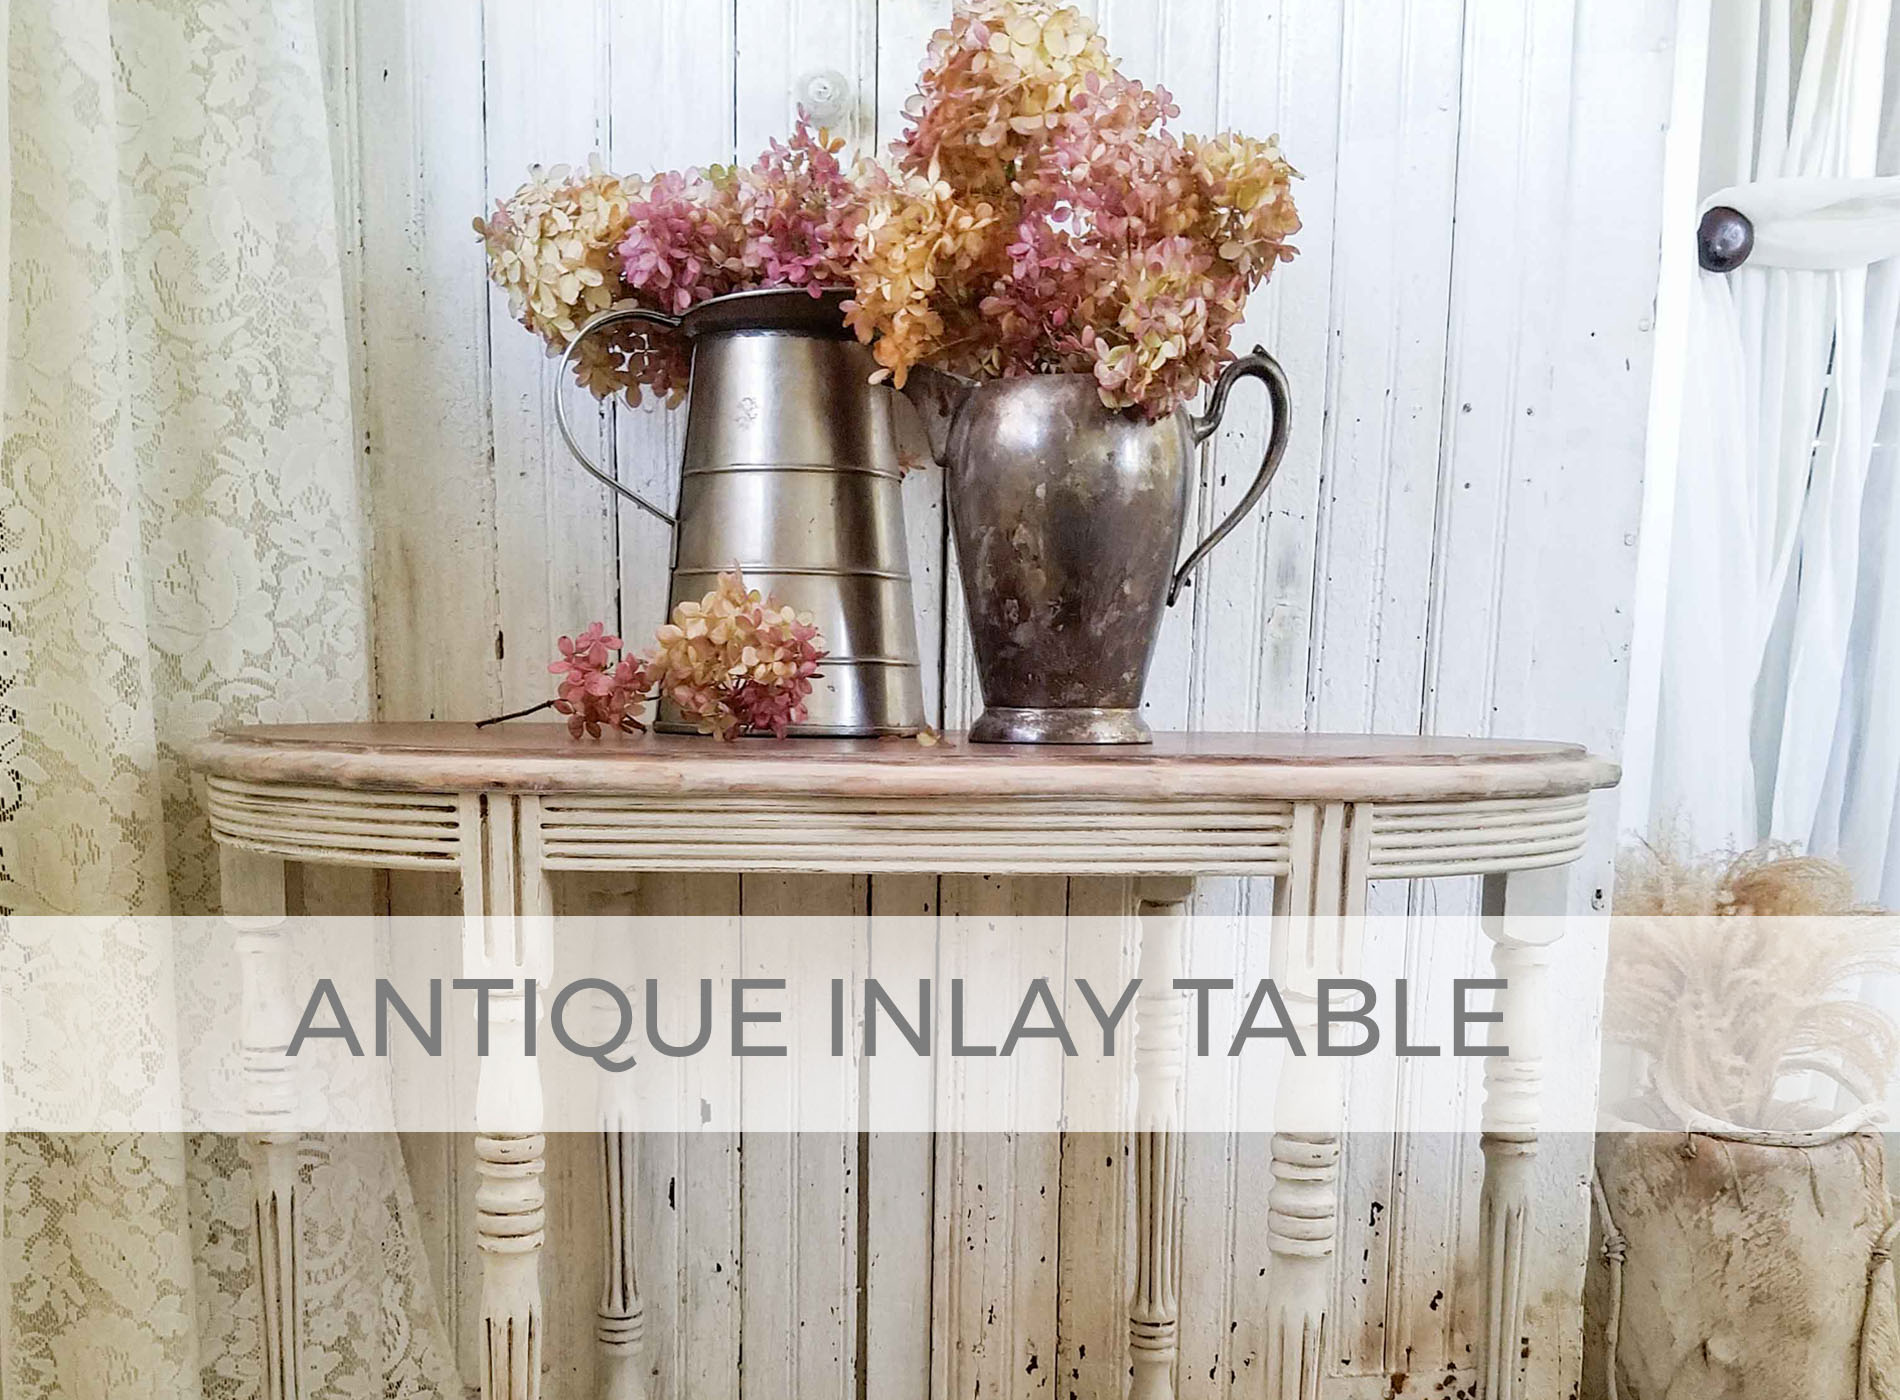 Antique Inlay Table by Larissa of Prodigal Pieces | prodigalpieces.com